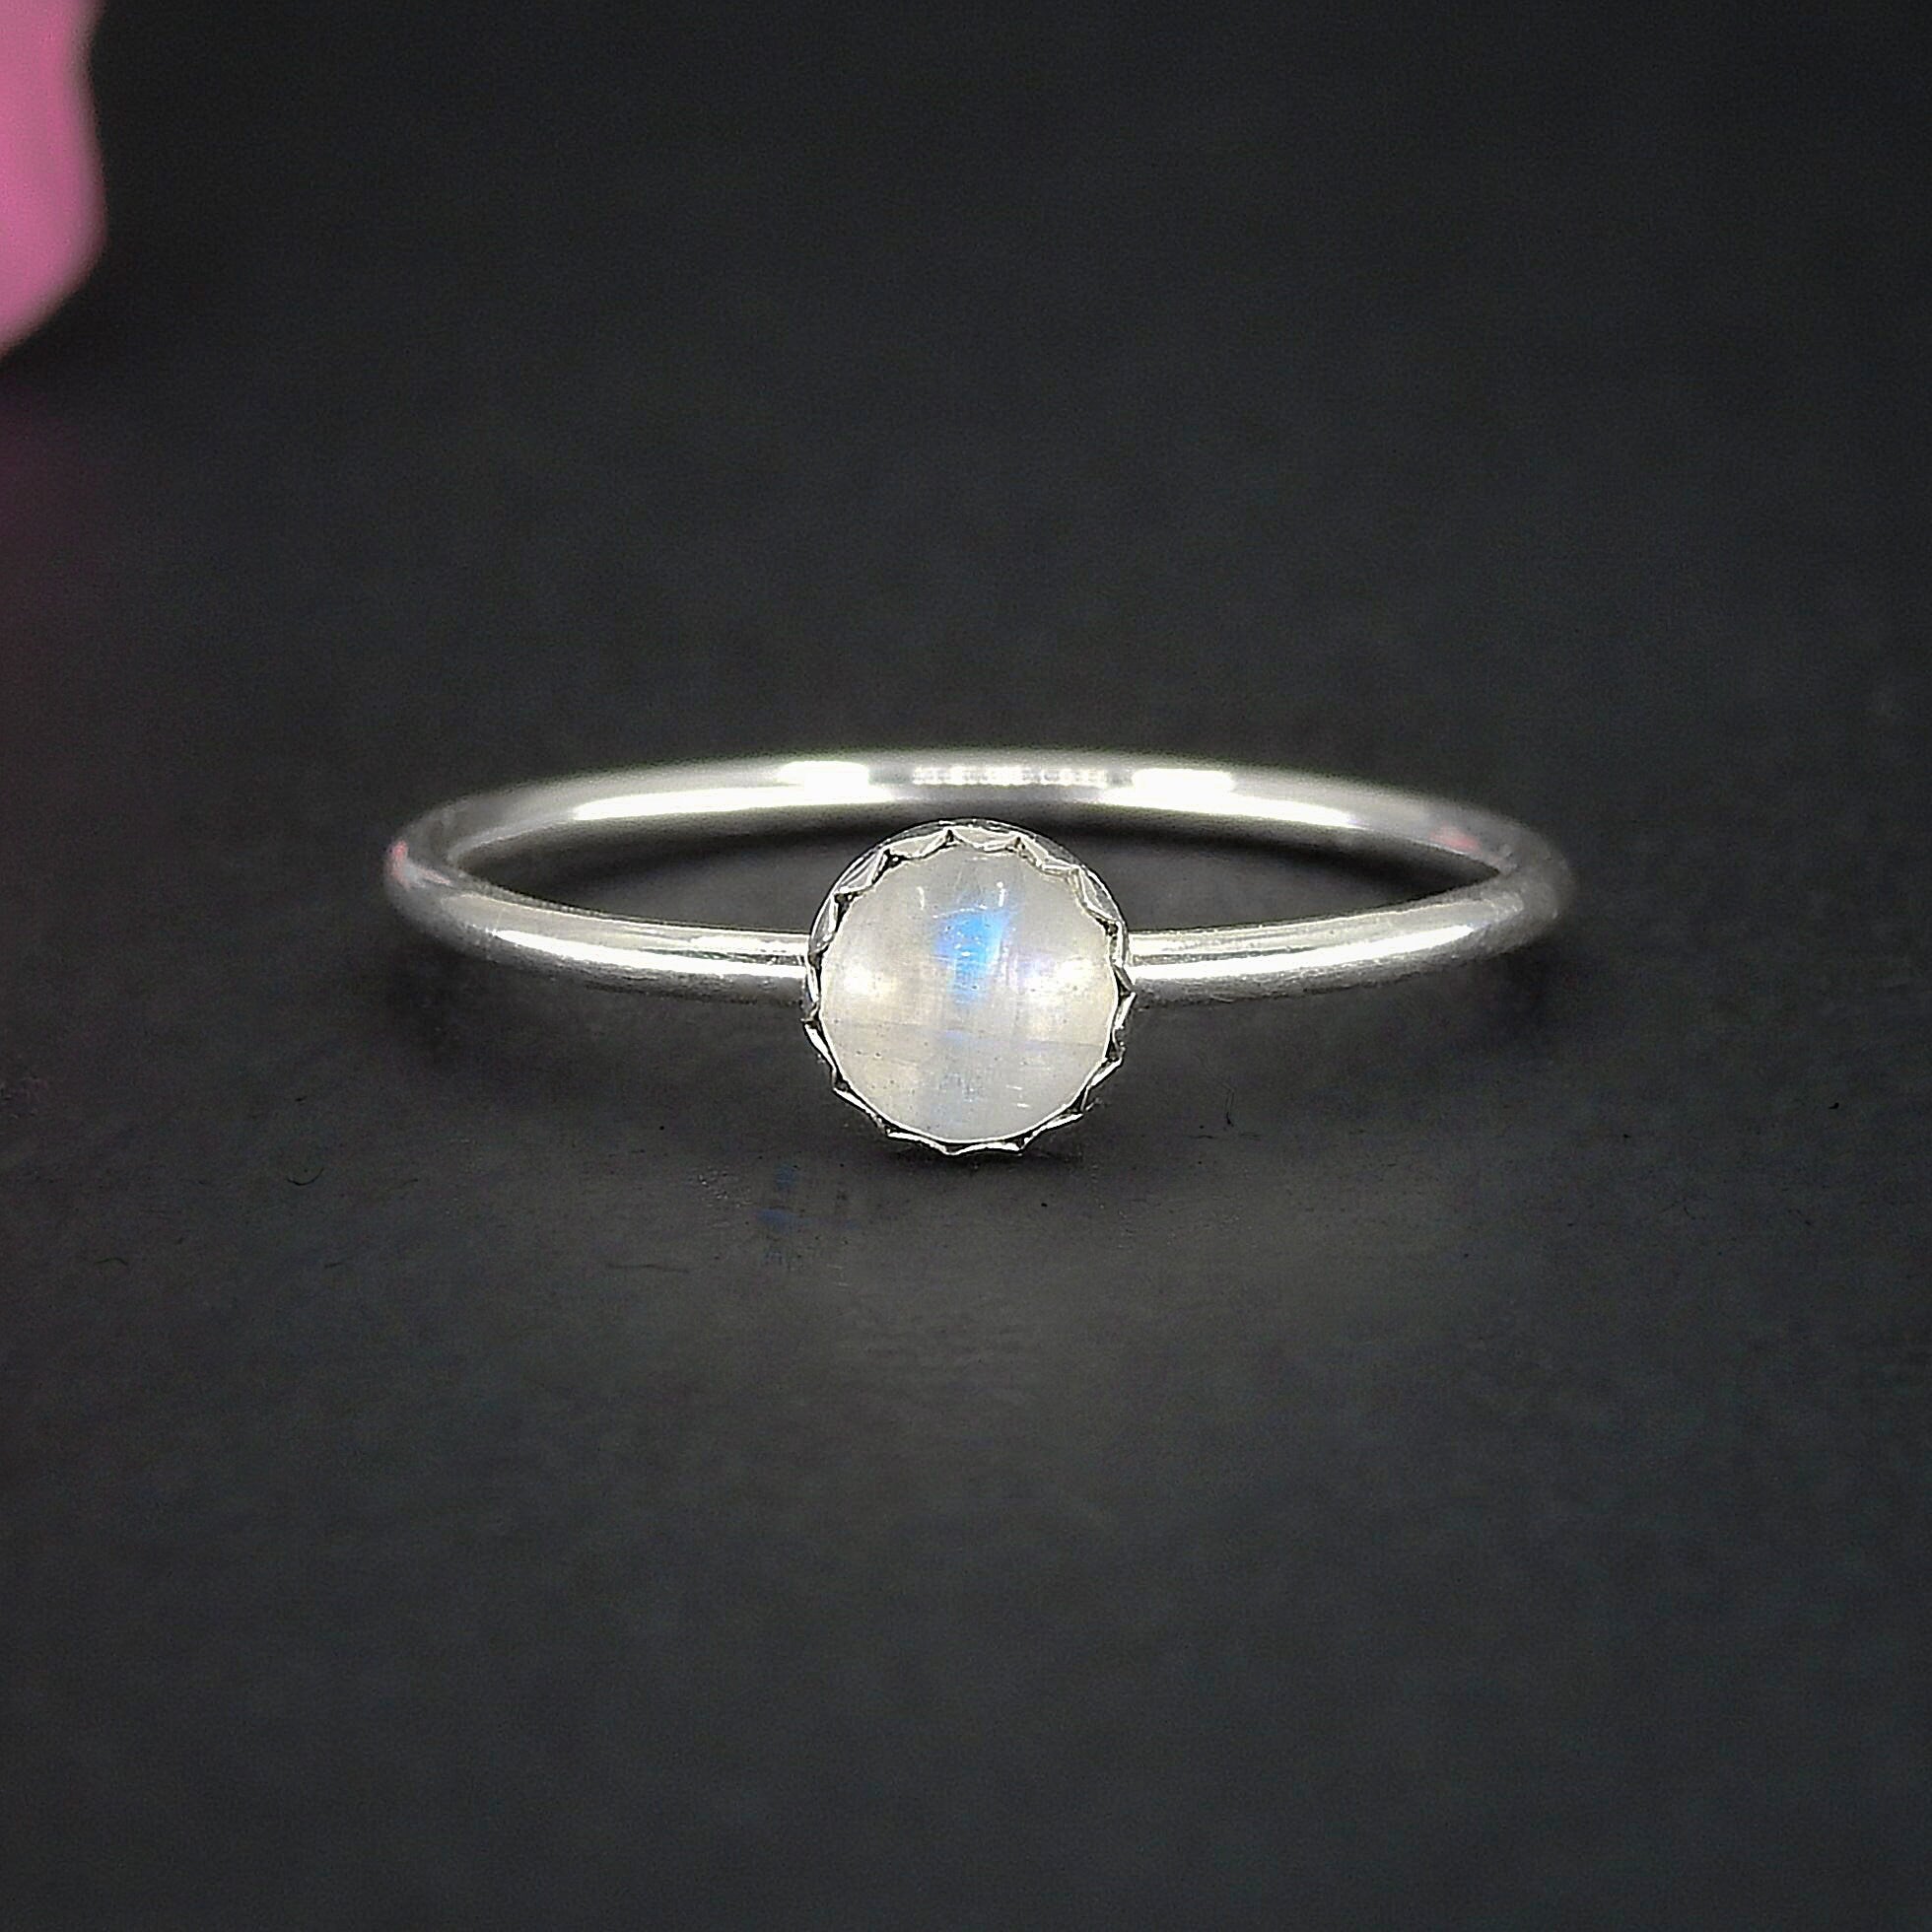 Moonstone Ring - Made to Order 